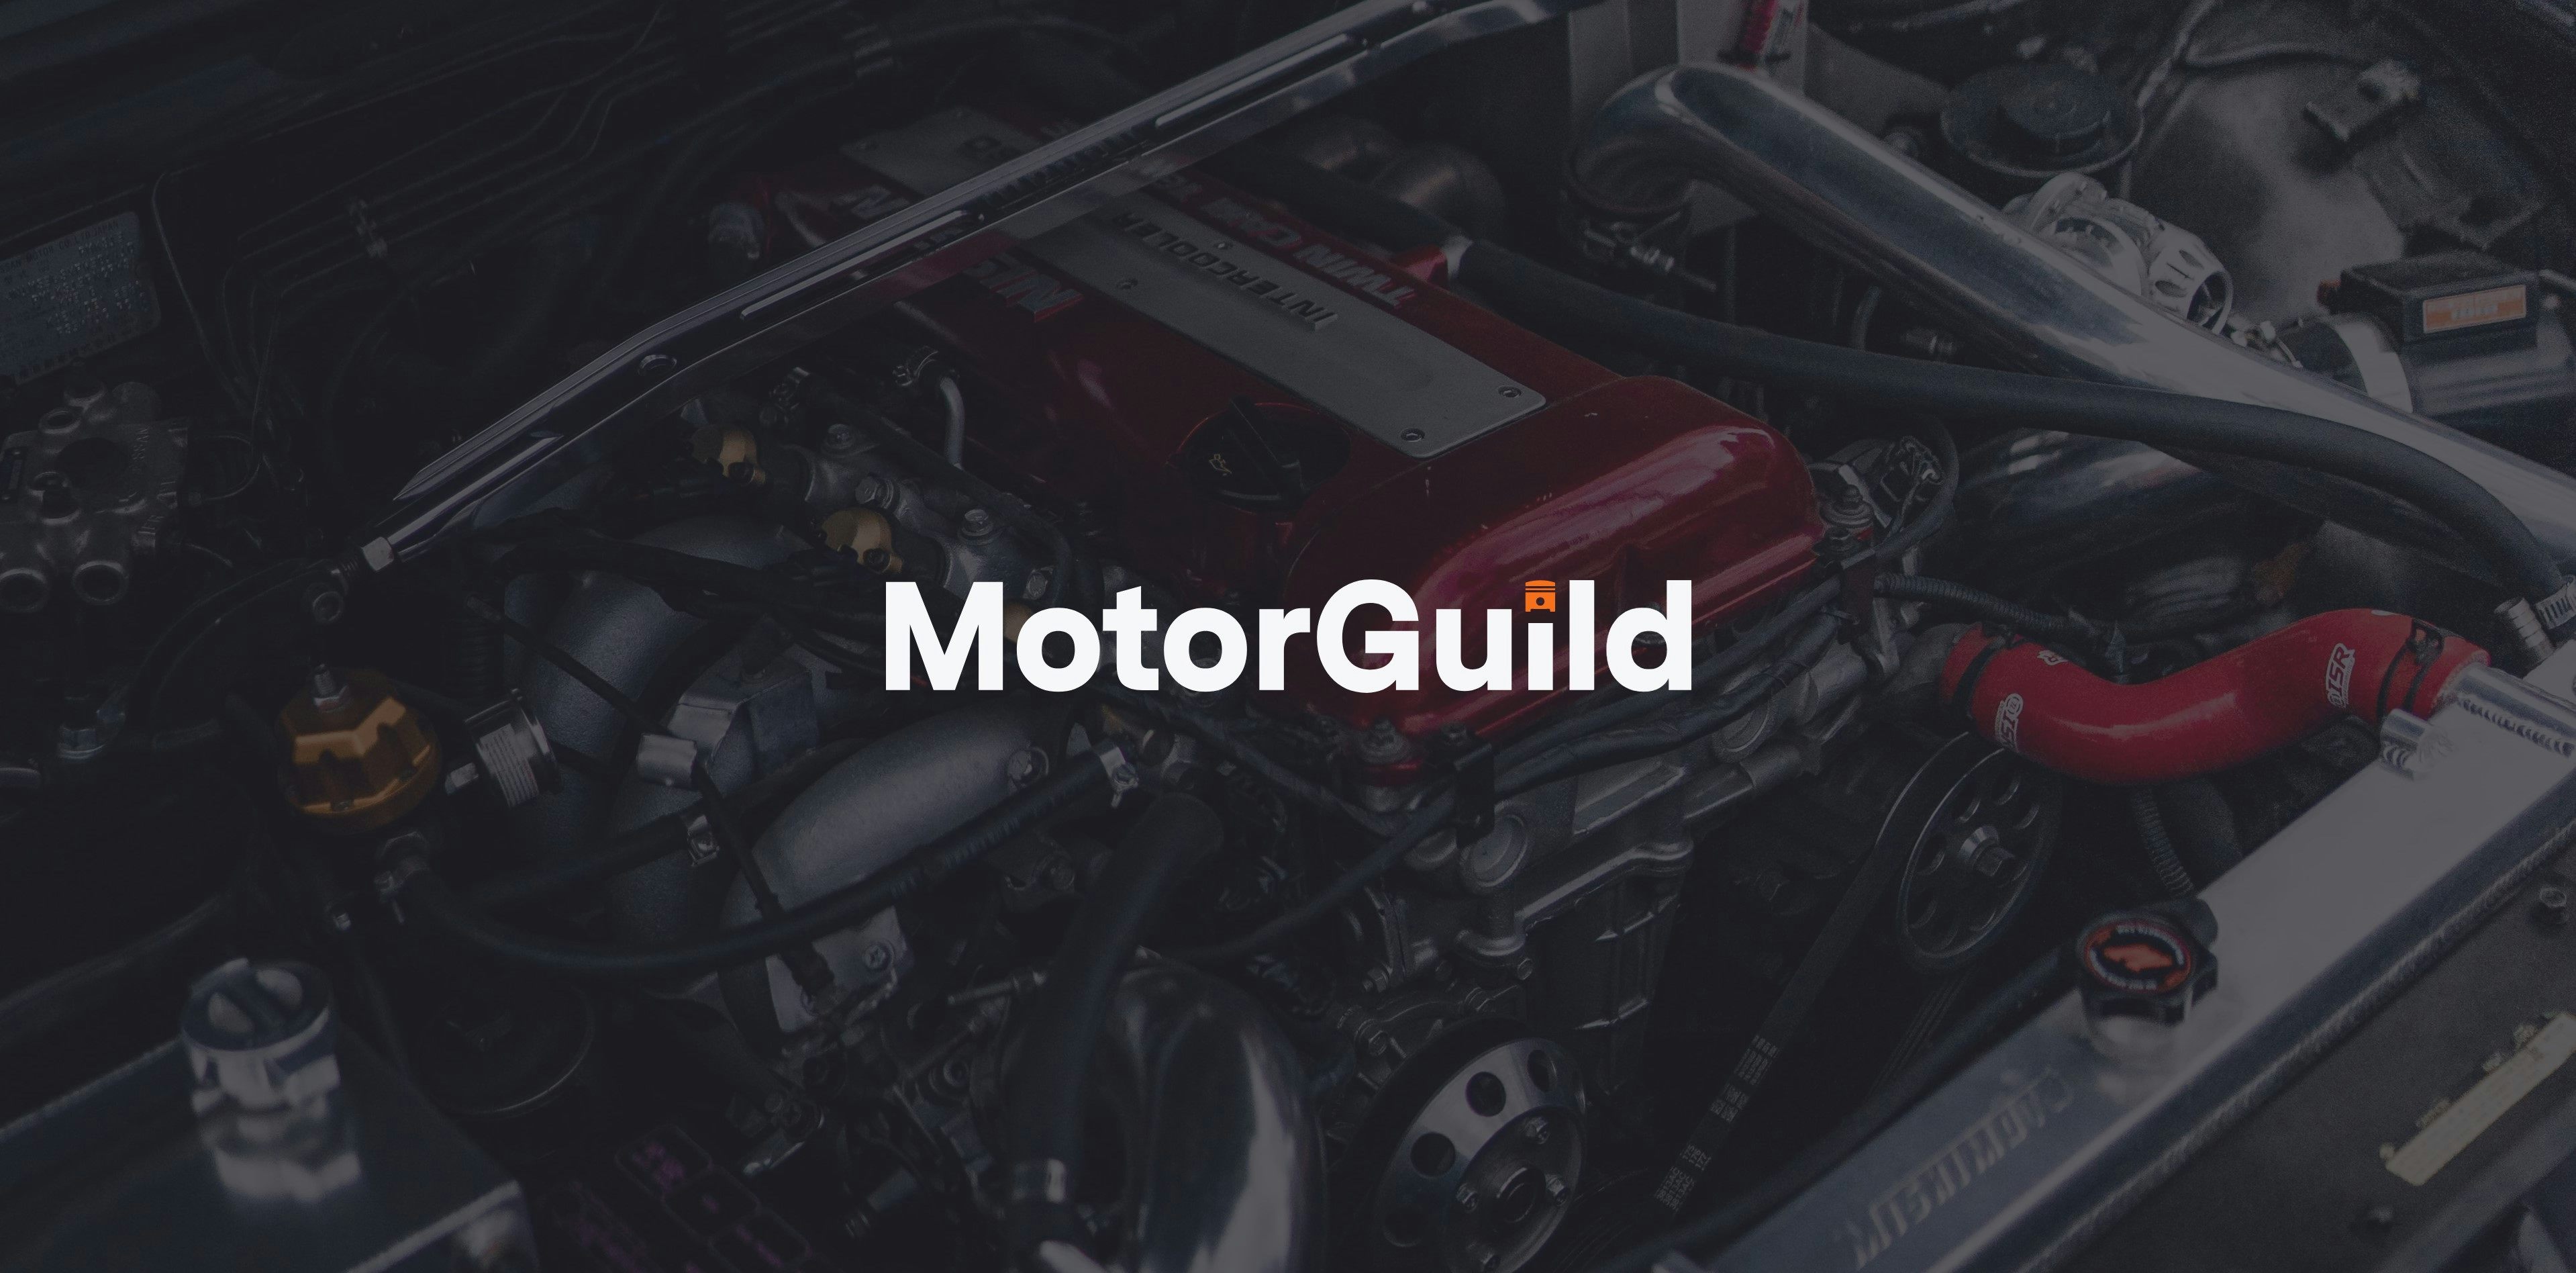 A photo of a modified engine bay overlayed with the MotorGuild logo.